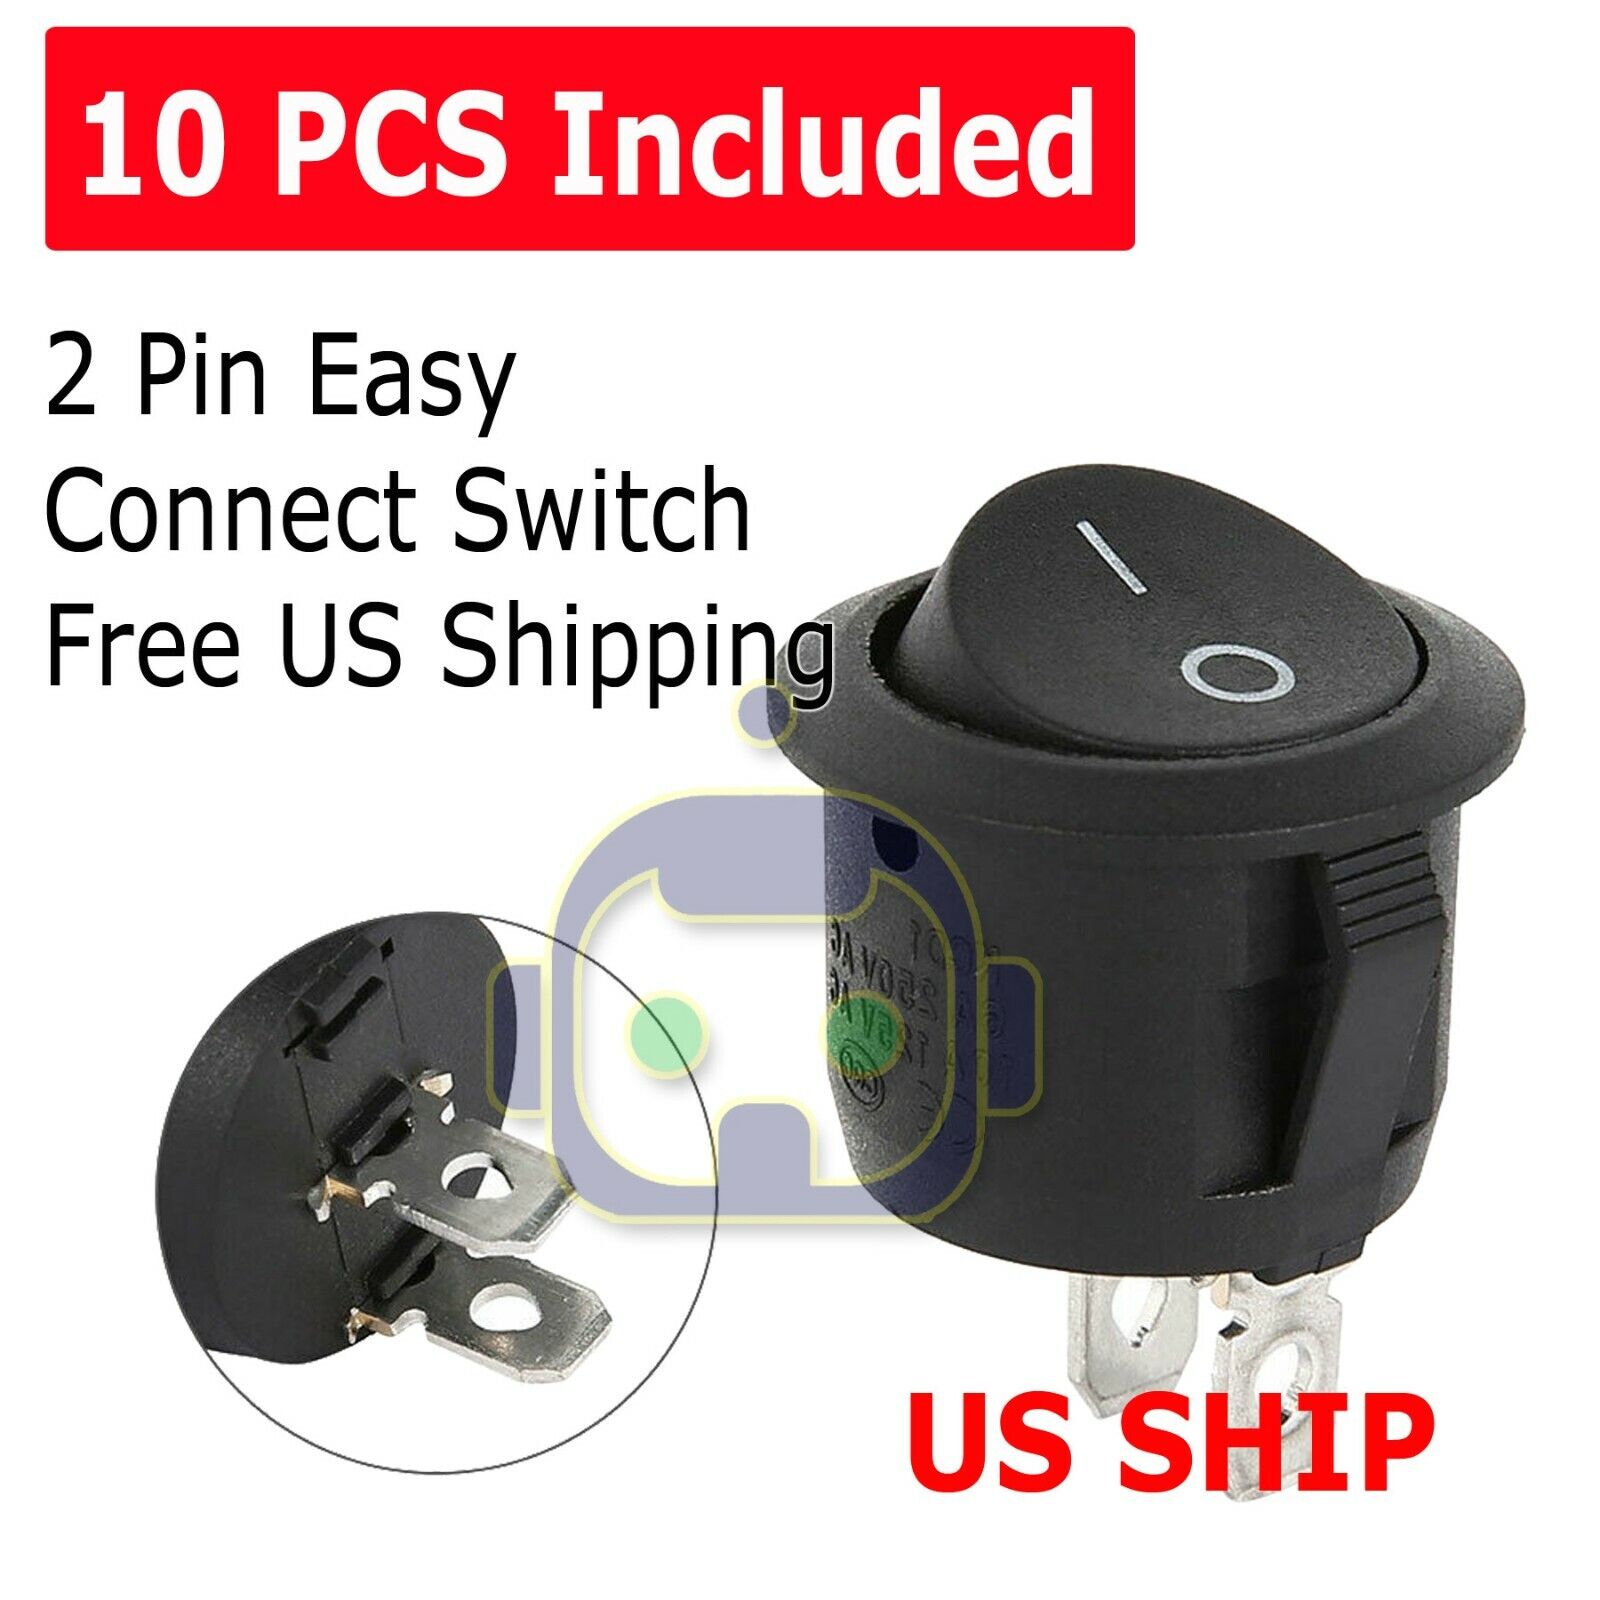 10PCS Round Rocker Switch ON/OFF Toggle Round Button Boat Car Auto Switch 12V US